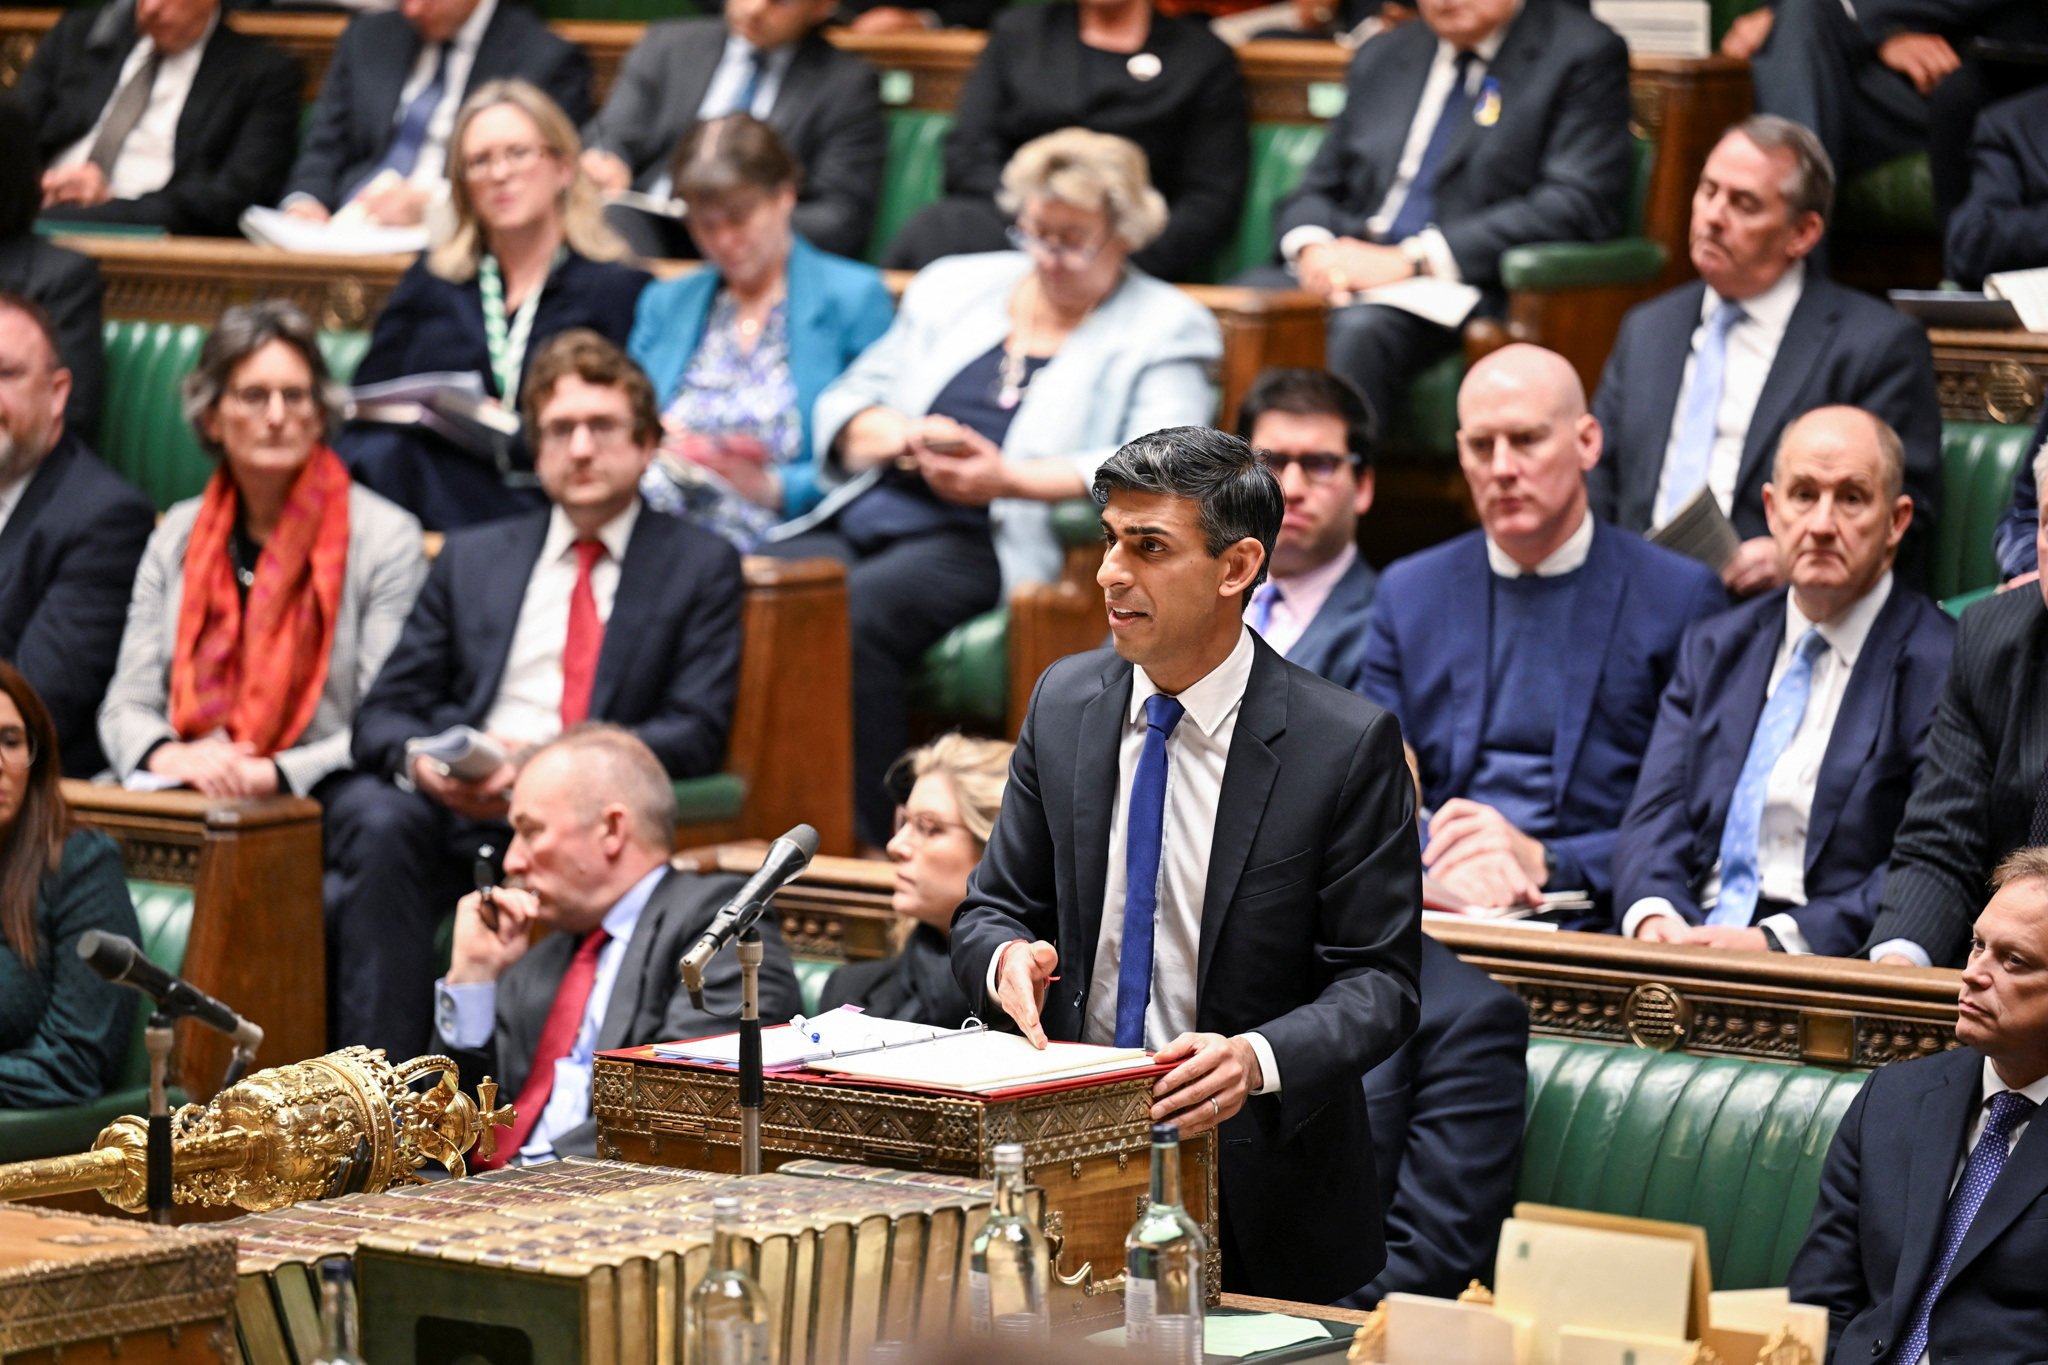 Britain’s Prime Minister Rishi Sunak in the House of Commons, London on Monday. Photo: UK Parliament / Jessica Taylor / Handout via Reuters